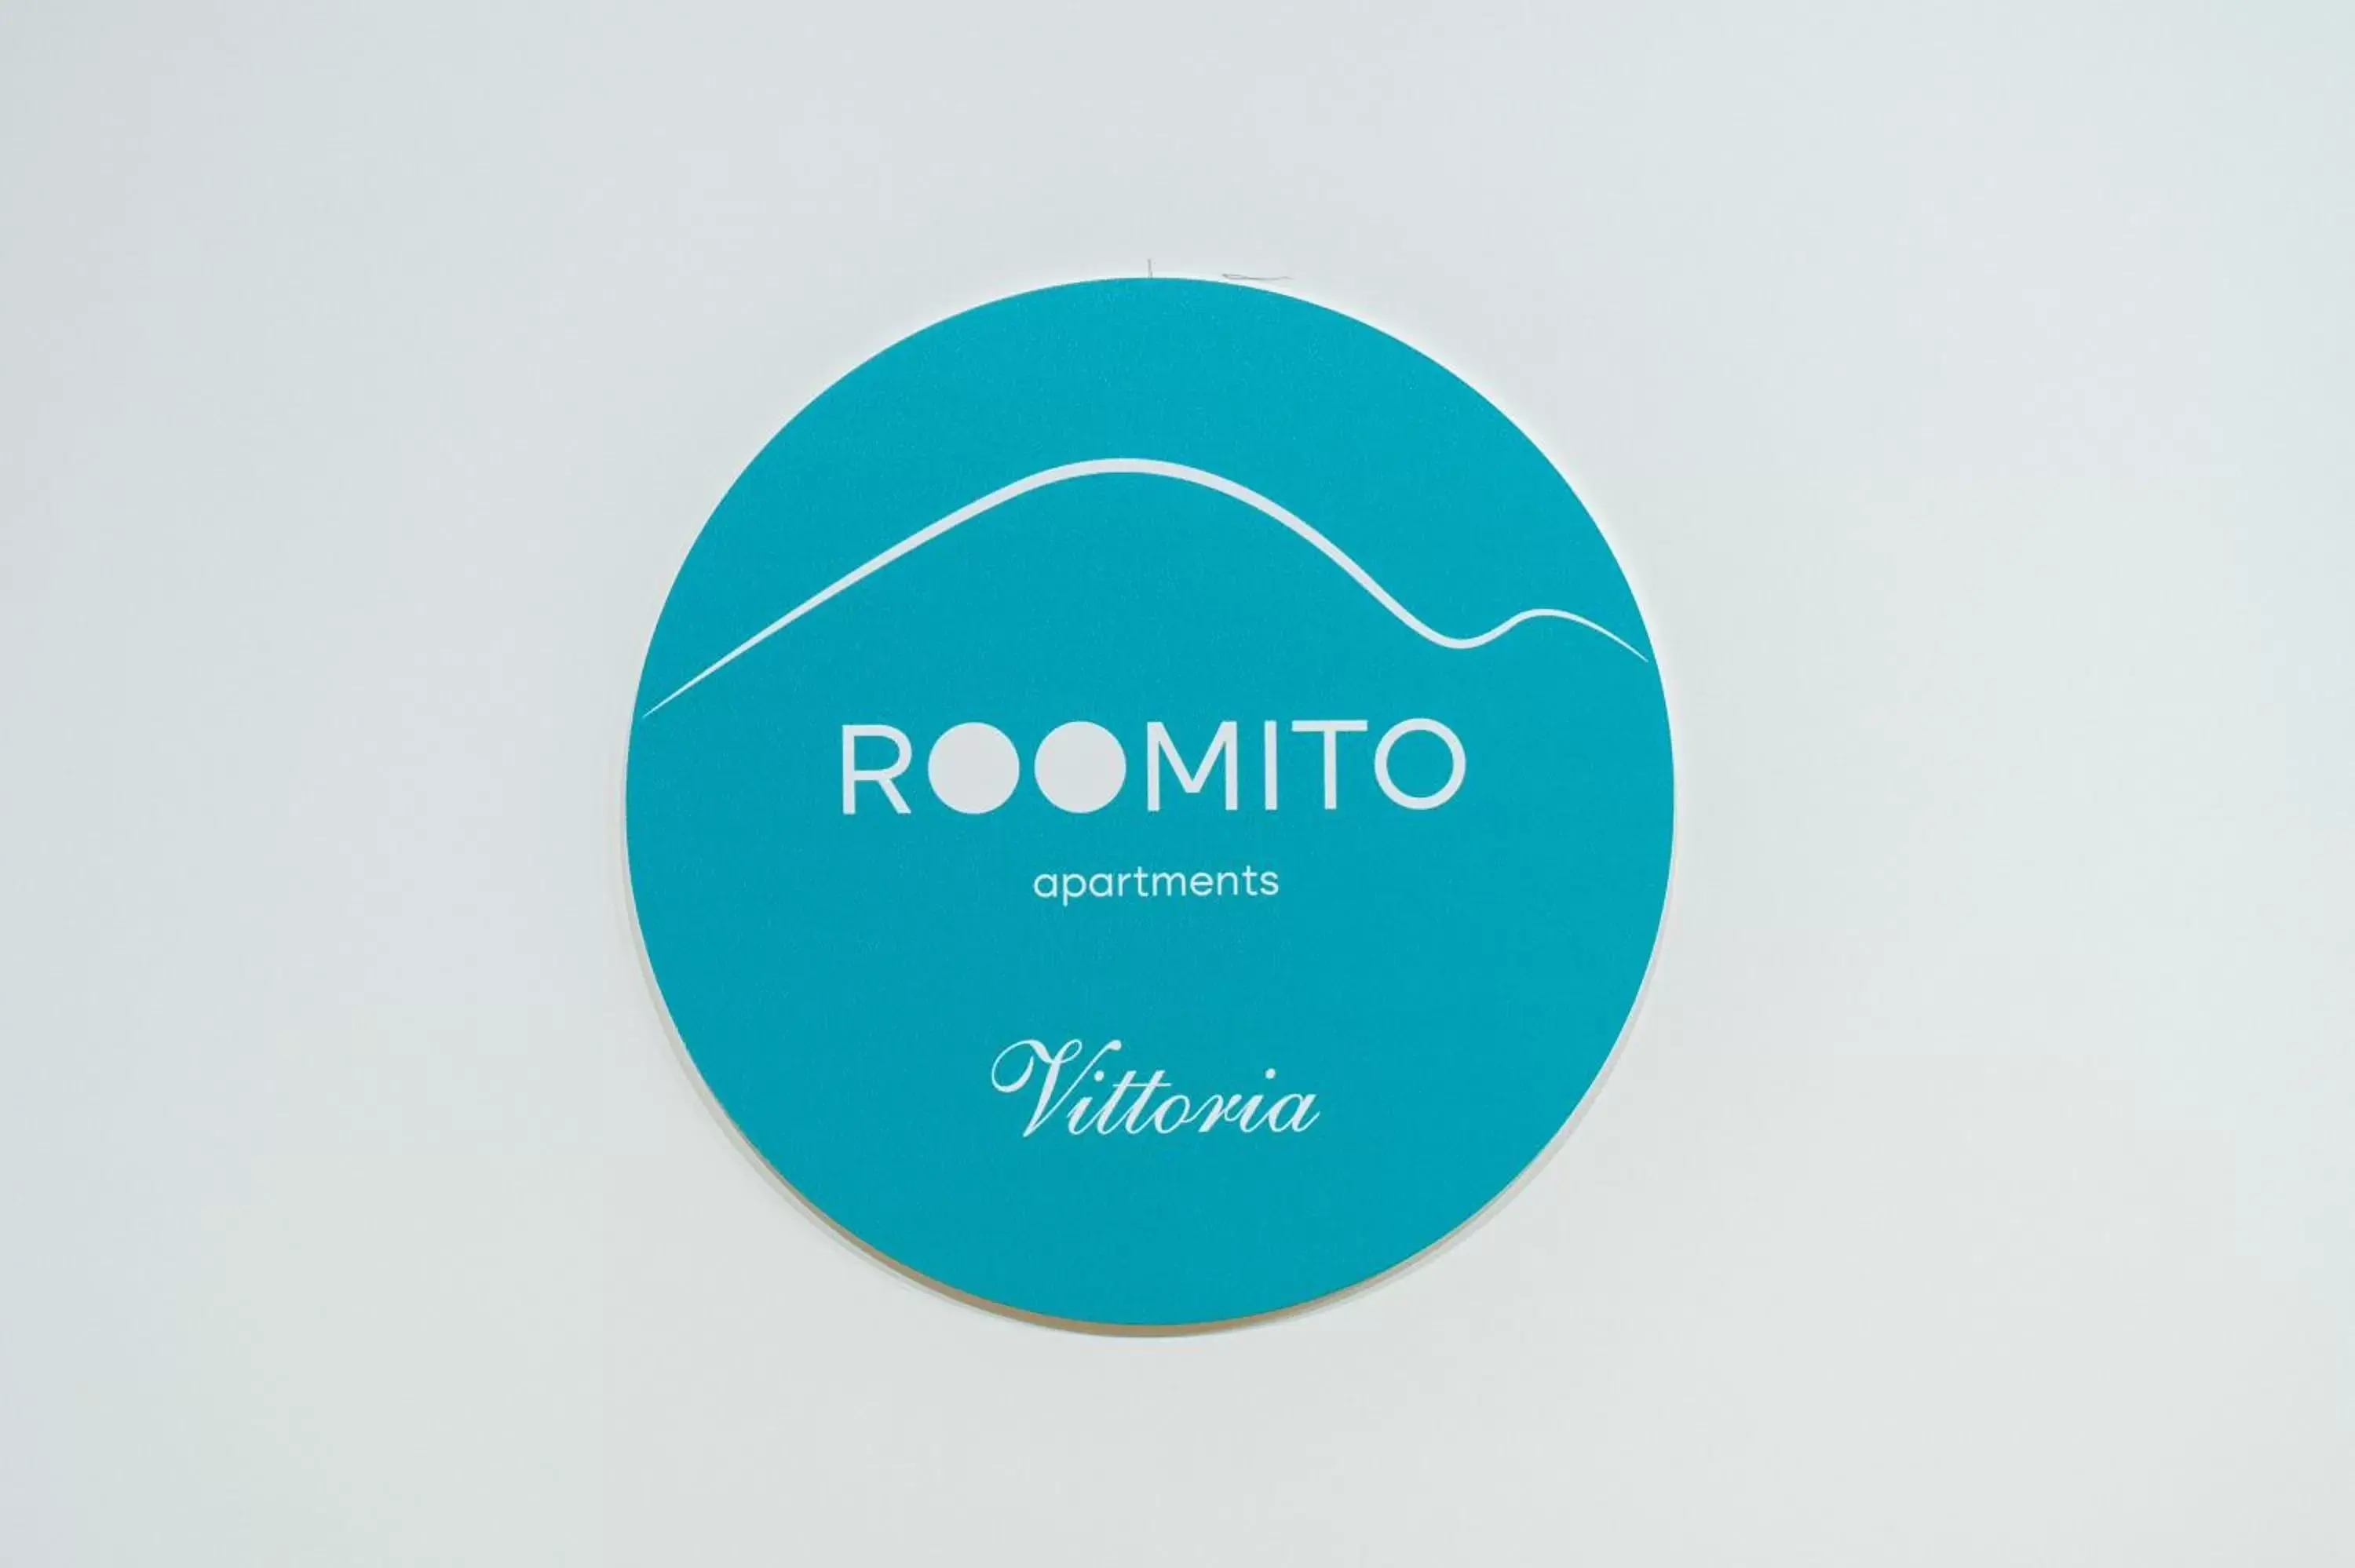 Property logo or sign in ROOMITO apartments